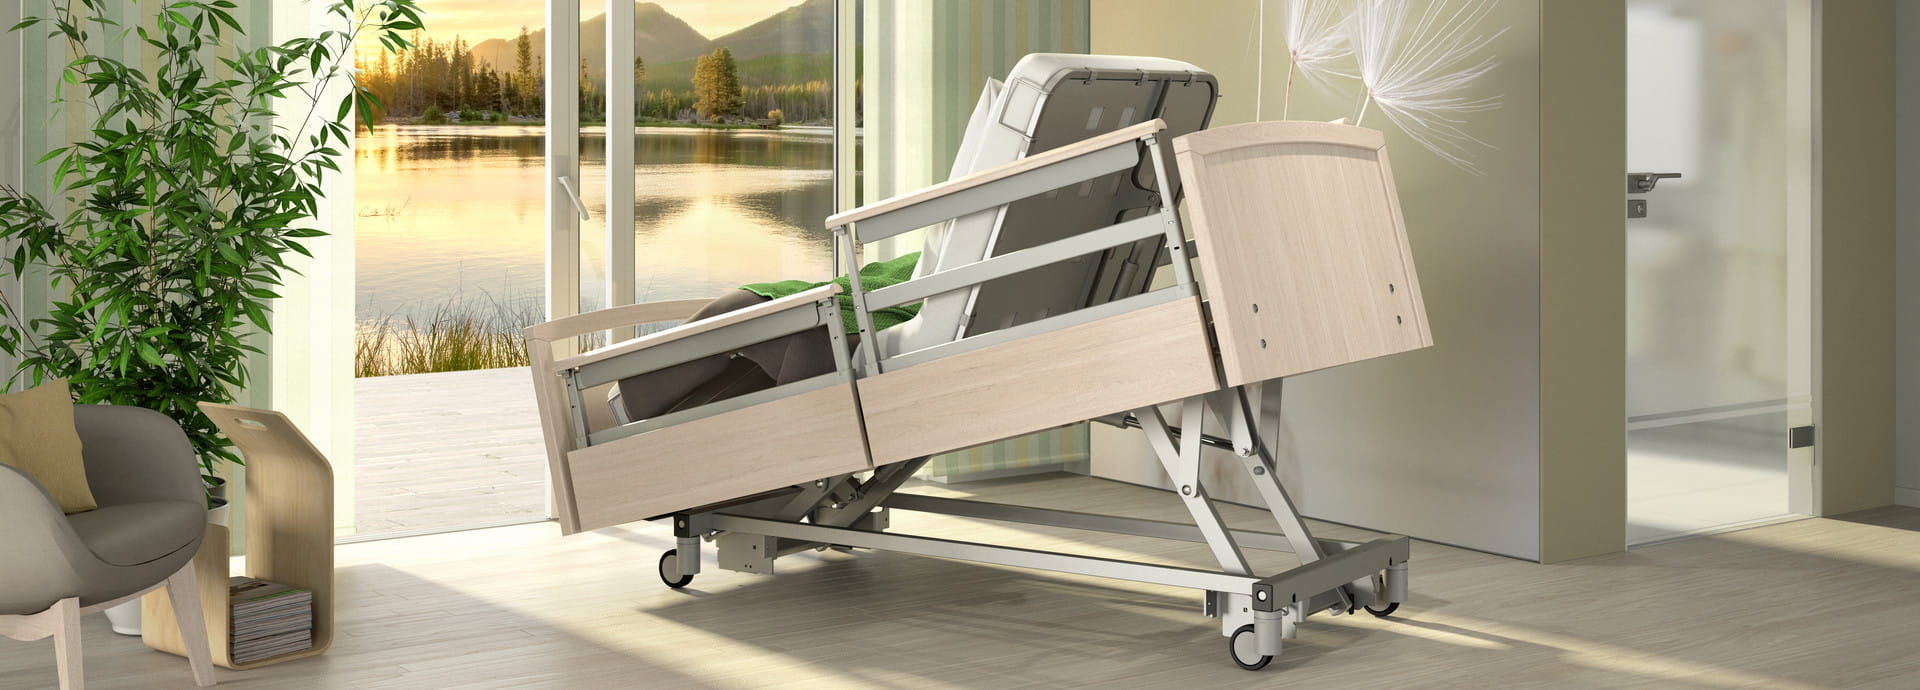 With the new nursing bed platform sentida sc and customized concepts, we can respond to the different requirements even more flexibly, efficiently and demand-oriented